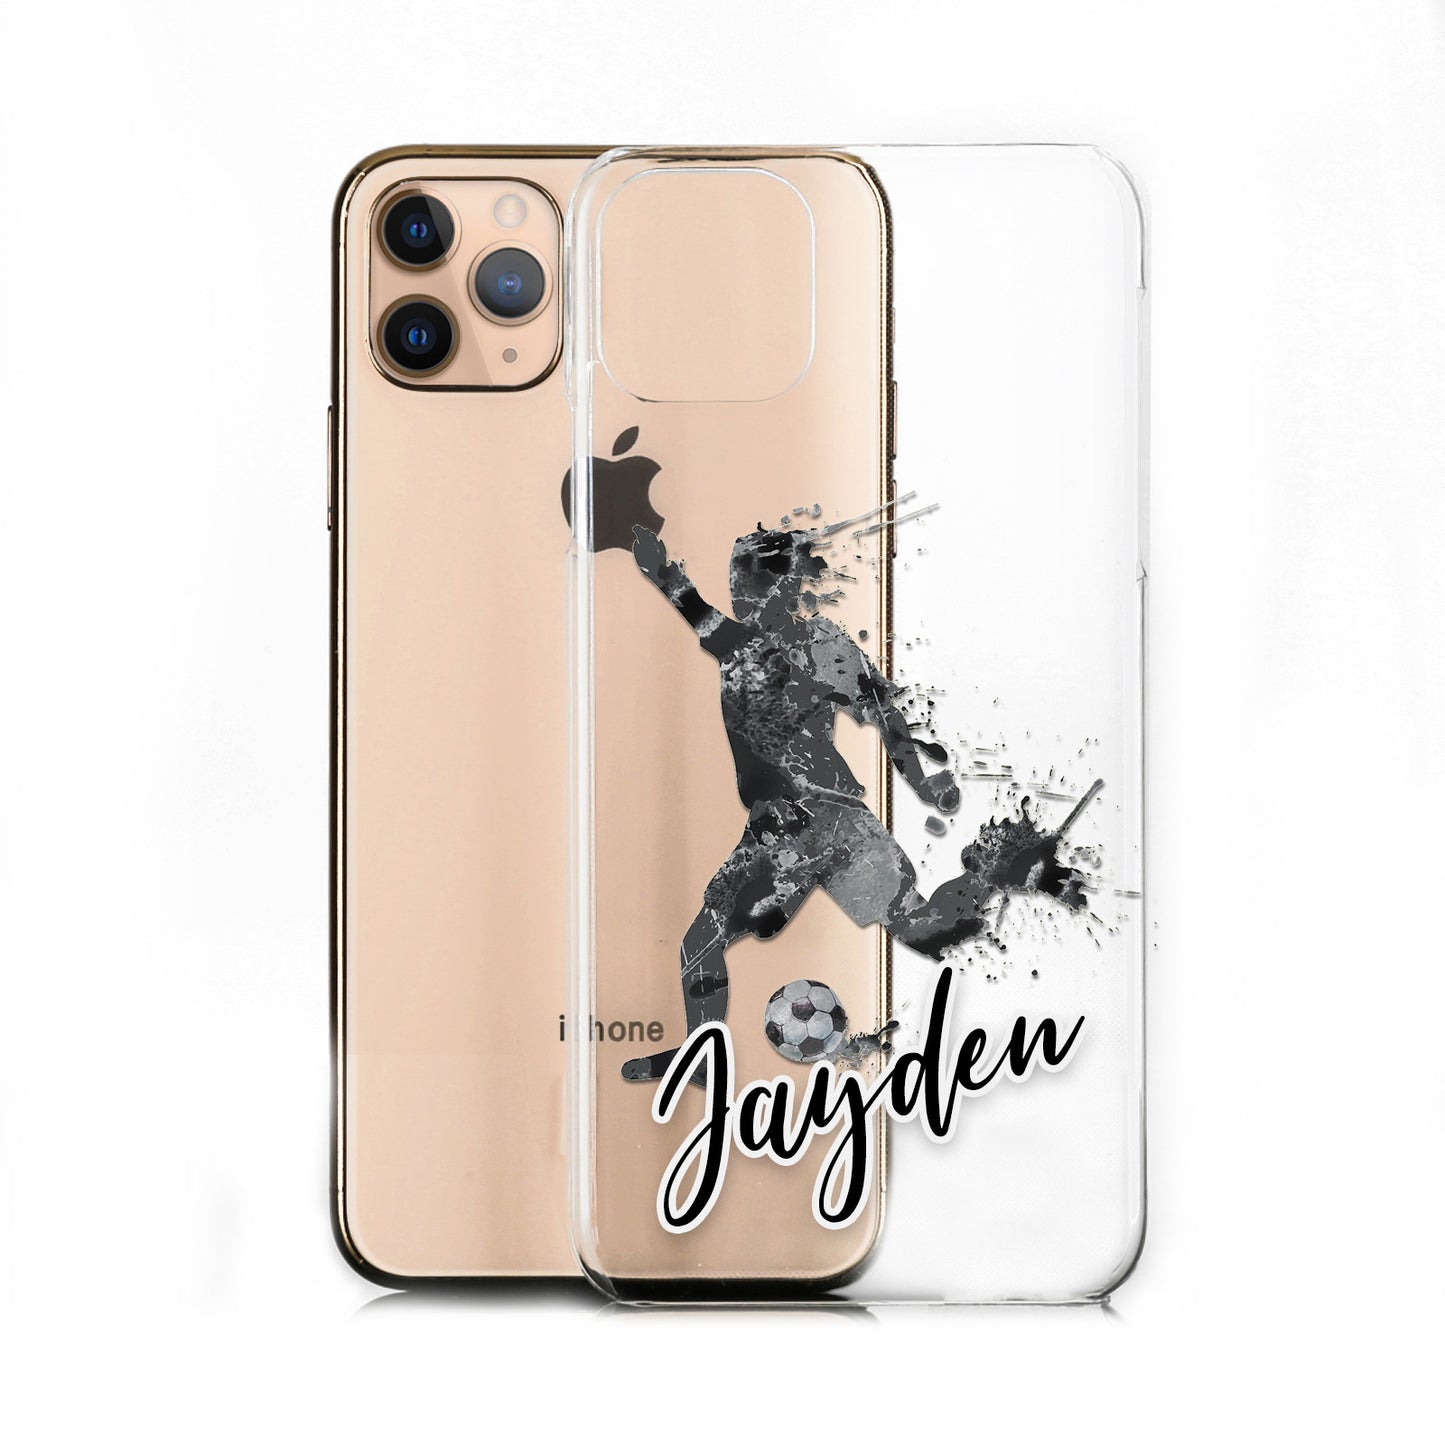 Personalised OnePlus Phone Hard Case - Ash Grey Football Star with White Outlined Text